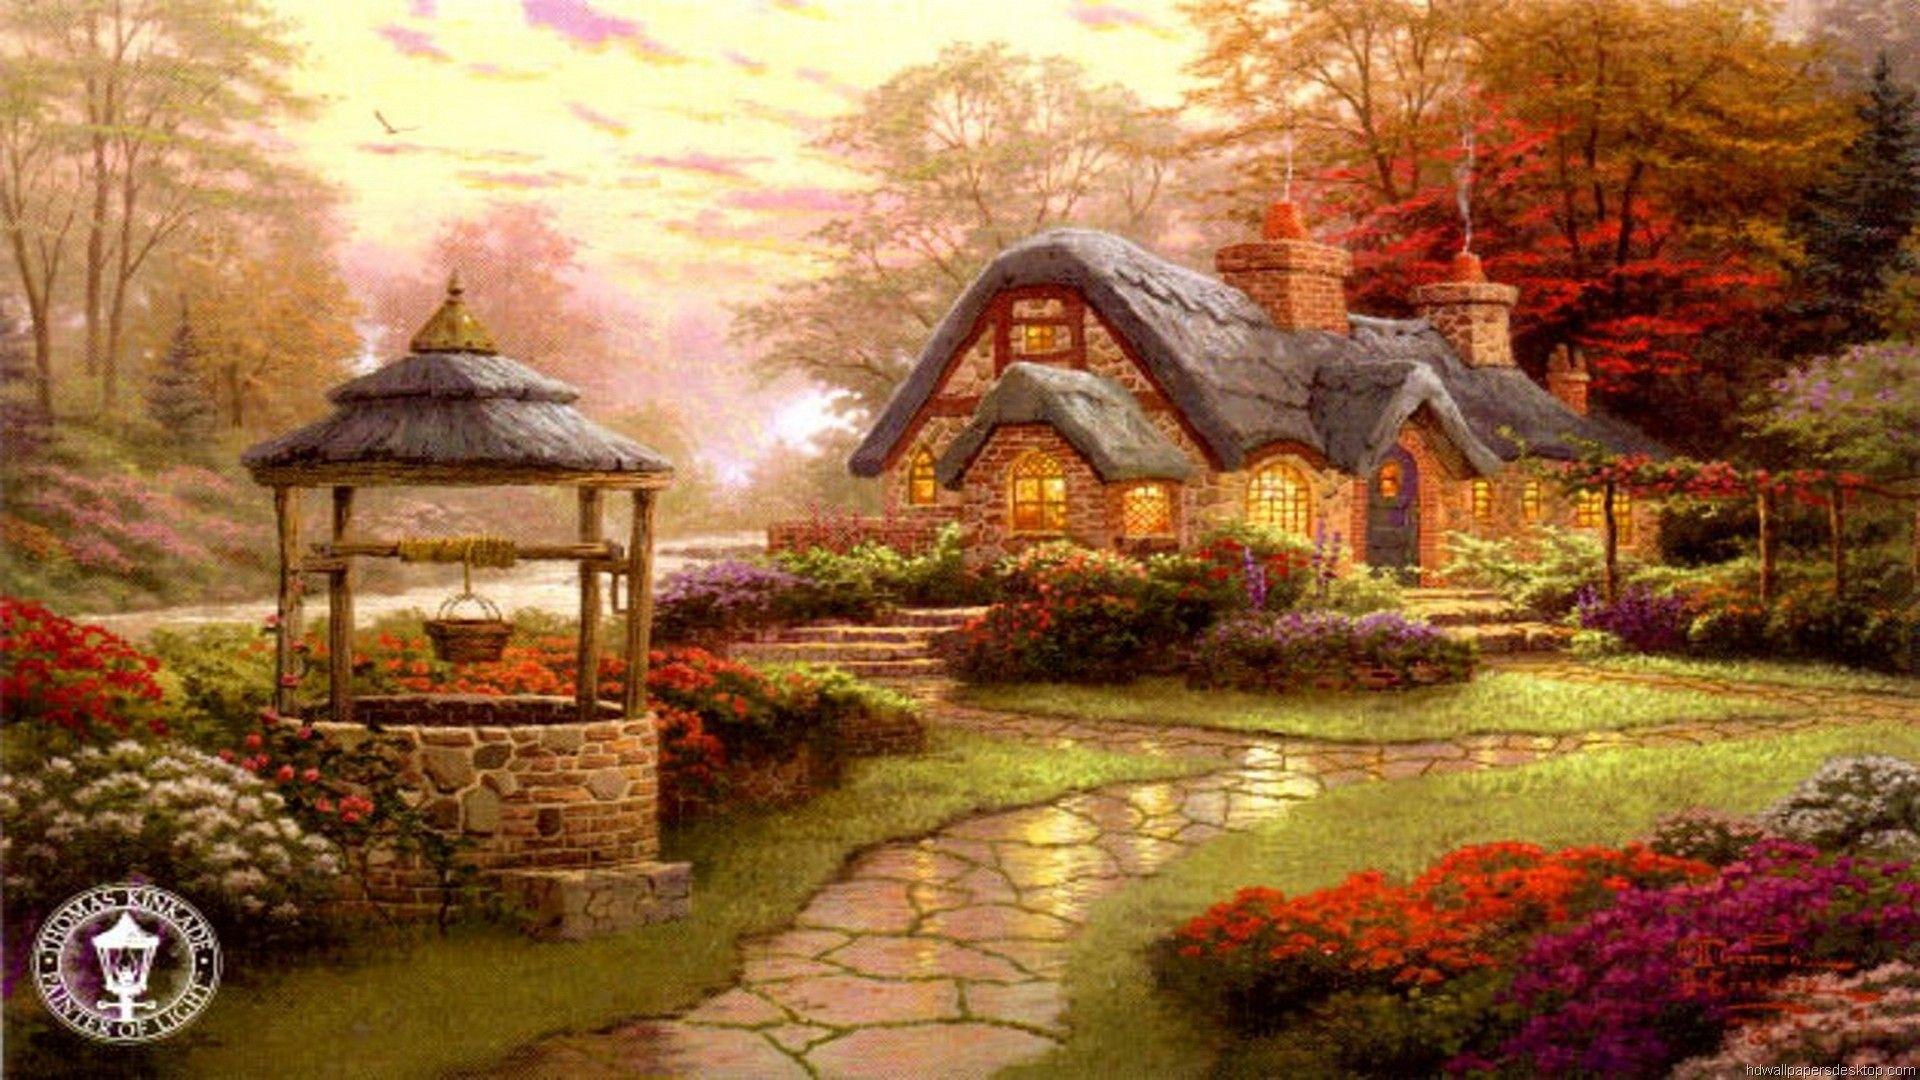 Autumn Cottage Wallpapers - Top Free Autumn Cottage Backgrounds